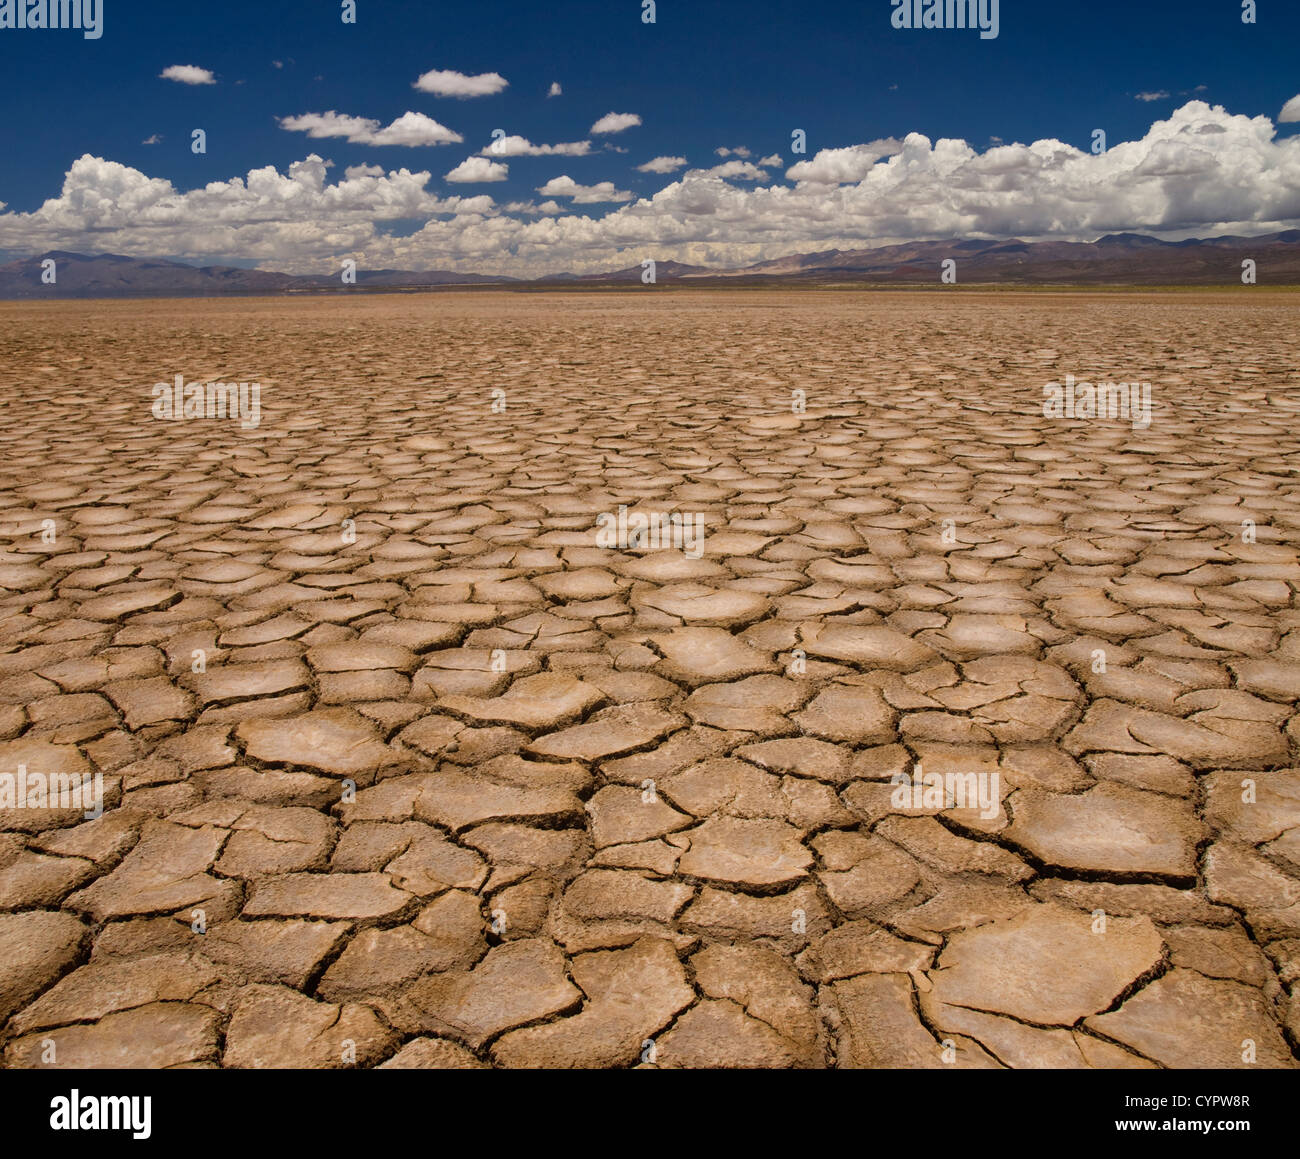 Large field of baked earth after a long drought. Stock Photo